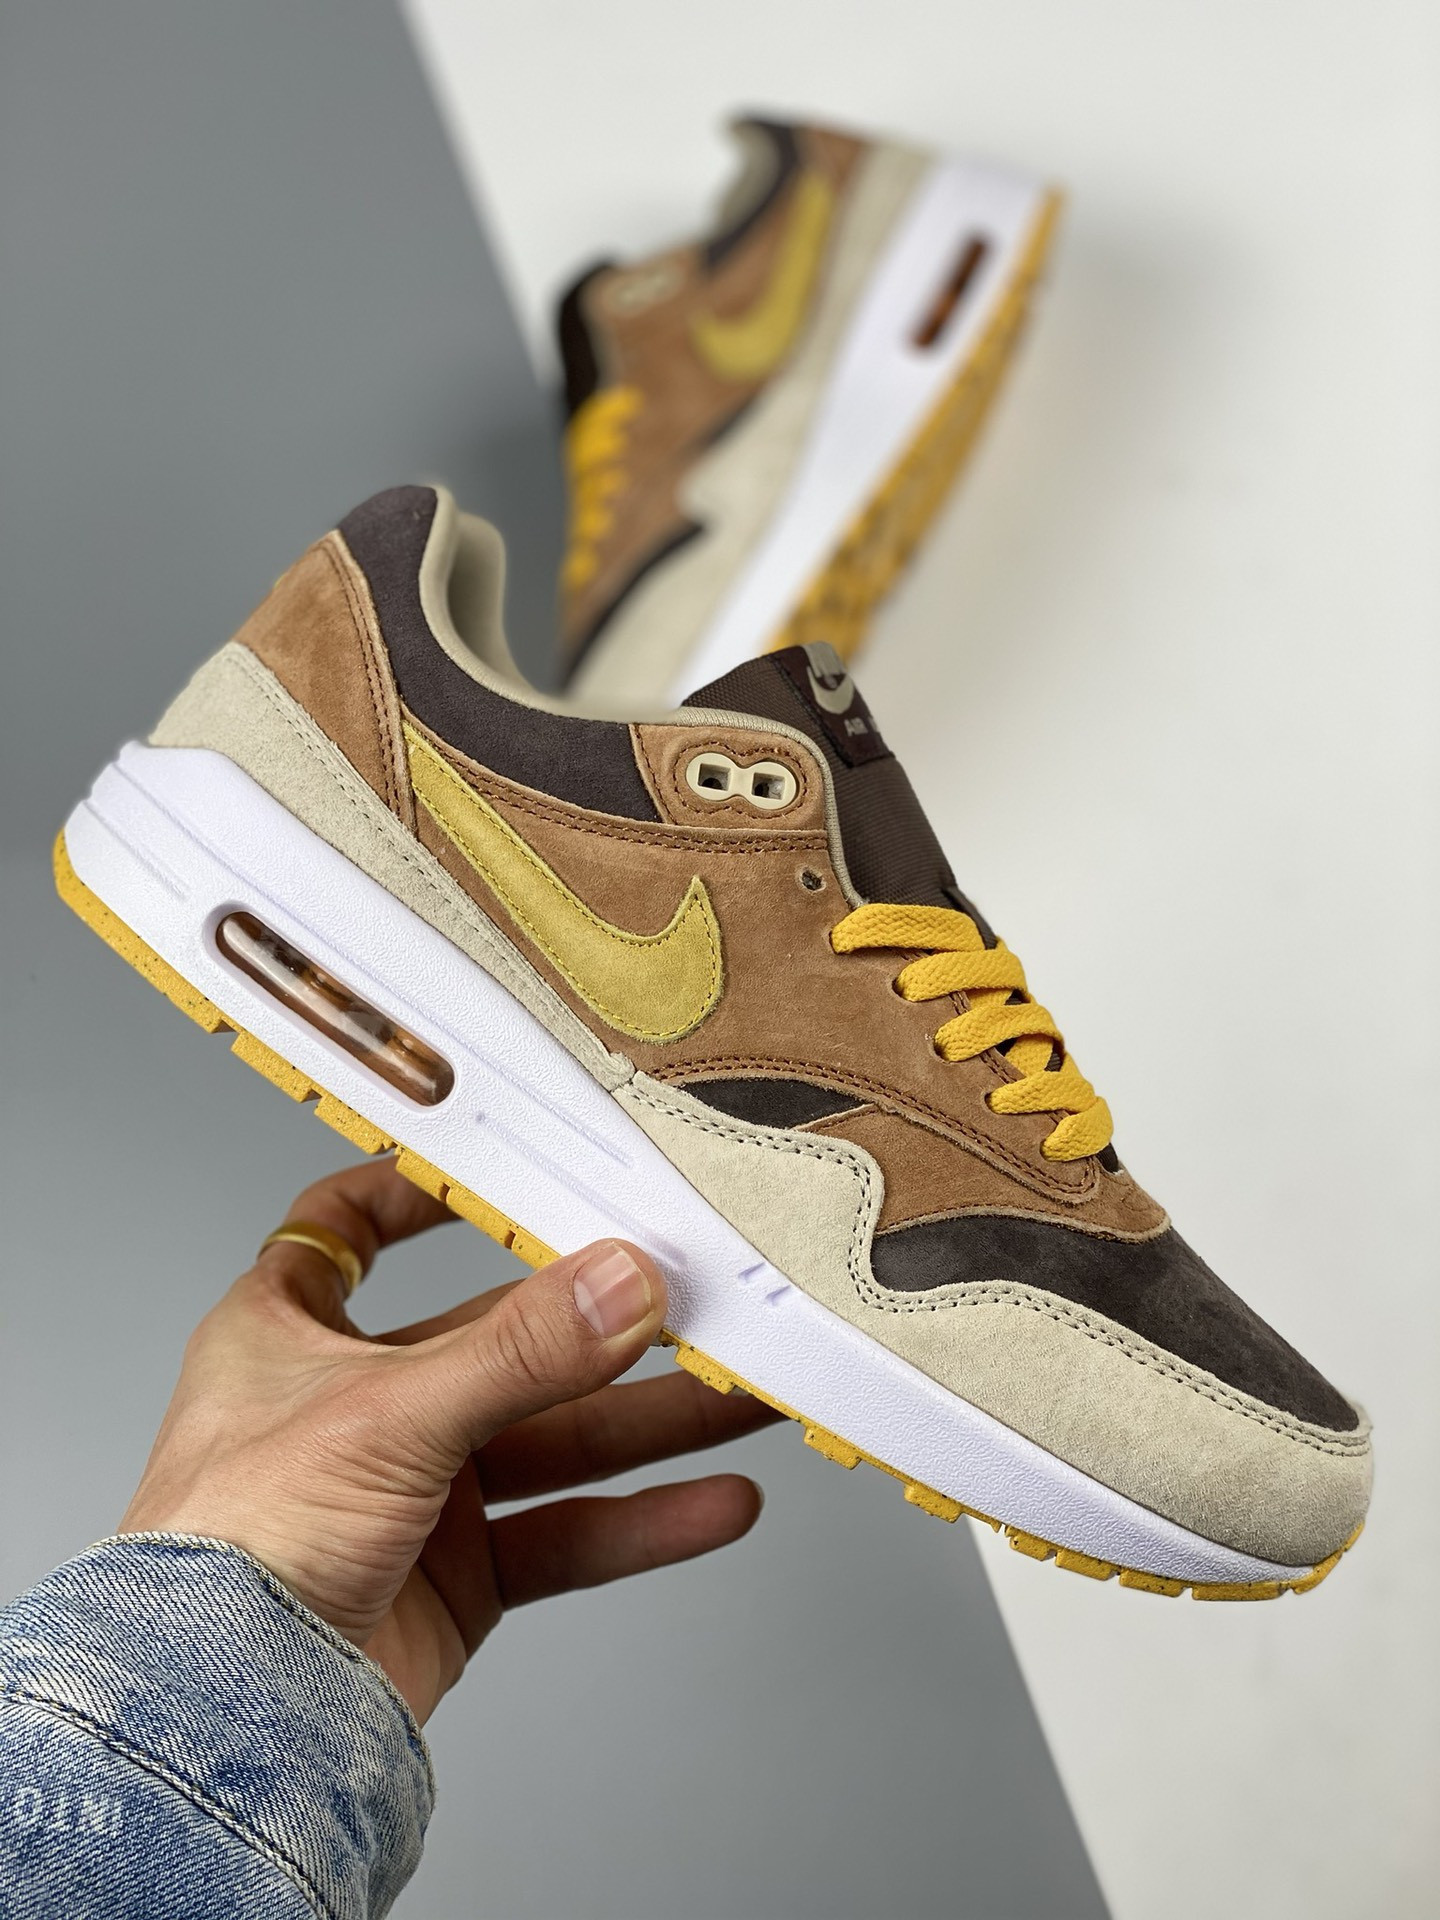 Nike Air Max 1 Ugly Duckling Pecan Yellow Ochre-Brown DZ0482-200 For Sale